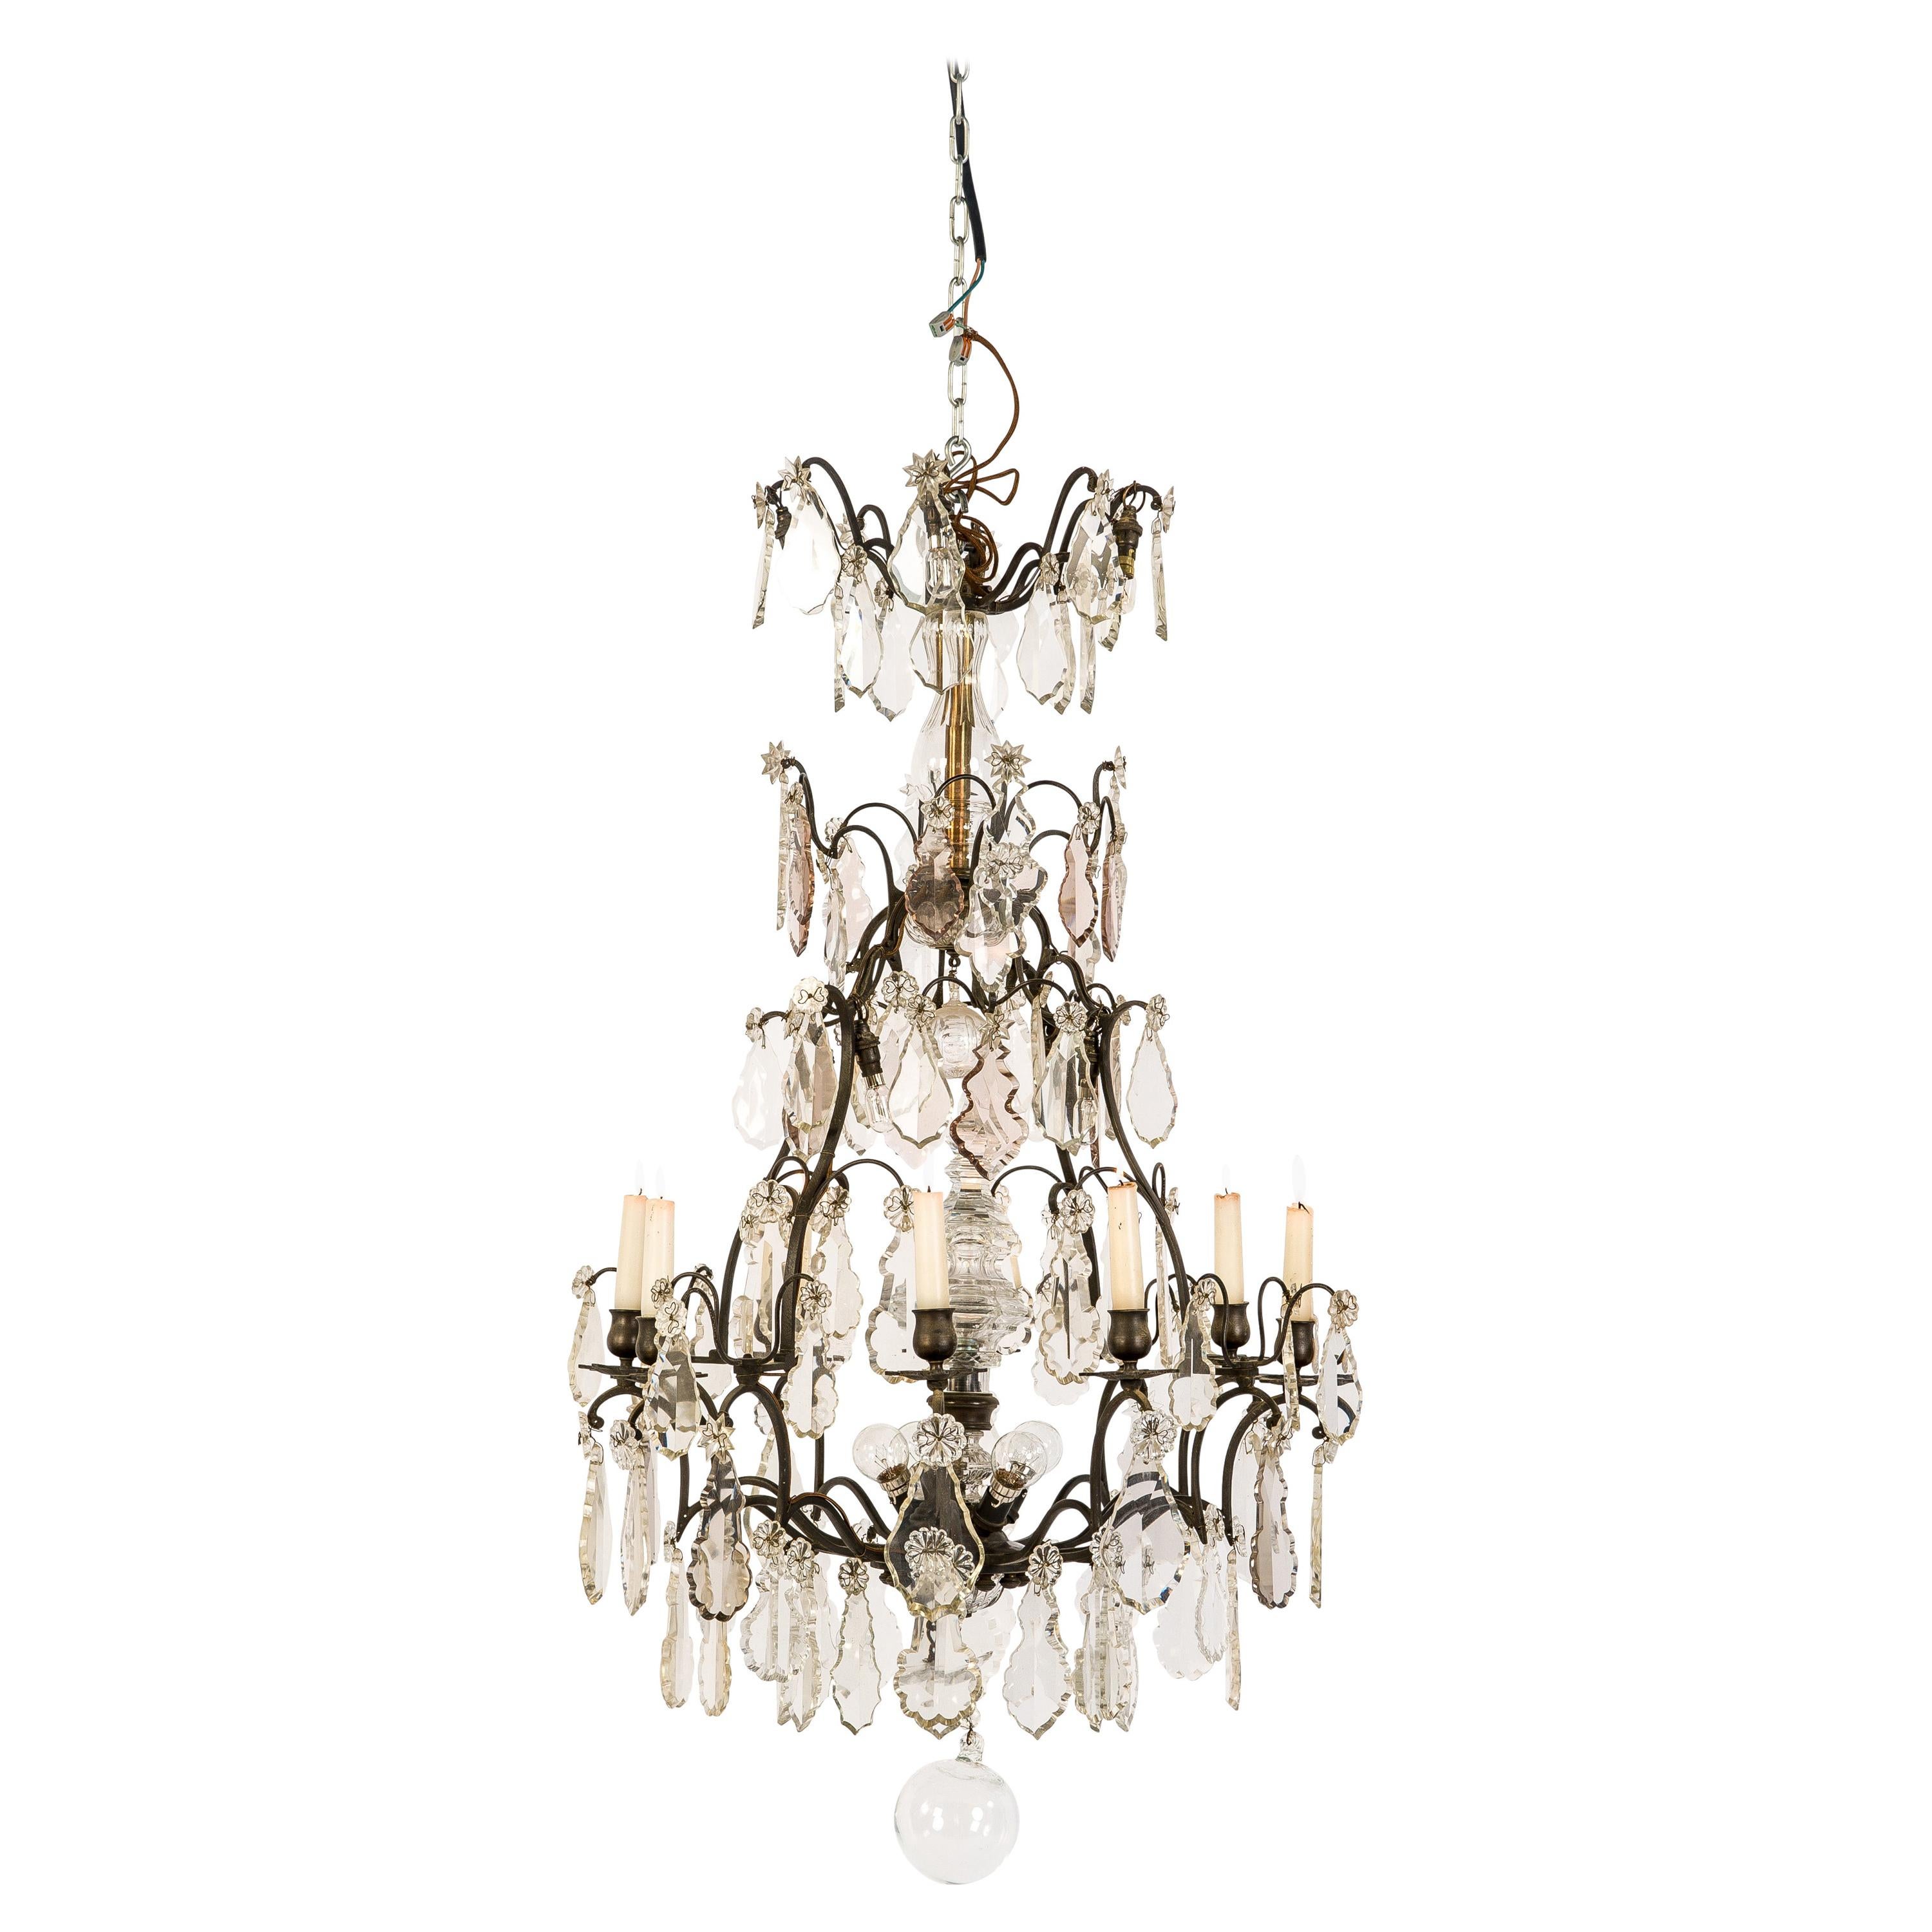 19th Century Bronze Chandelier with Cut Crystal Ornaments and Candles and Lights For Sale